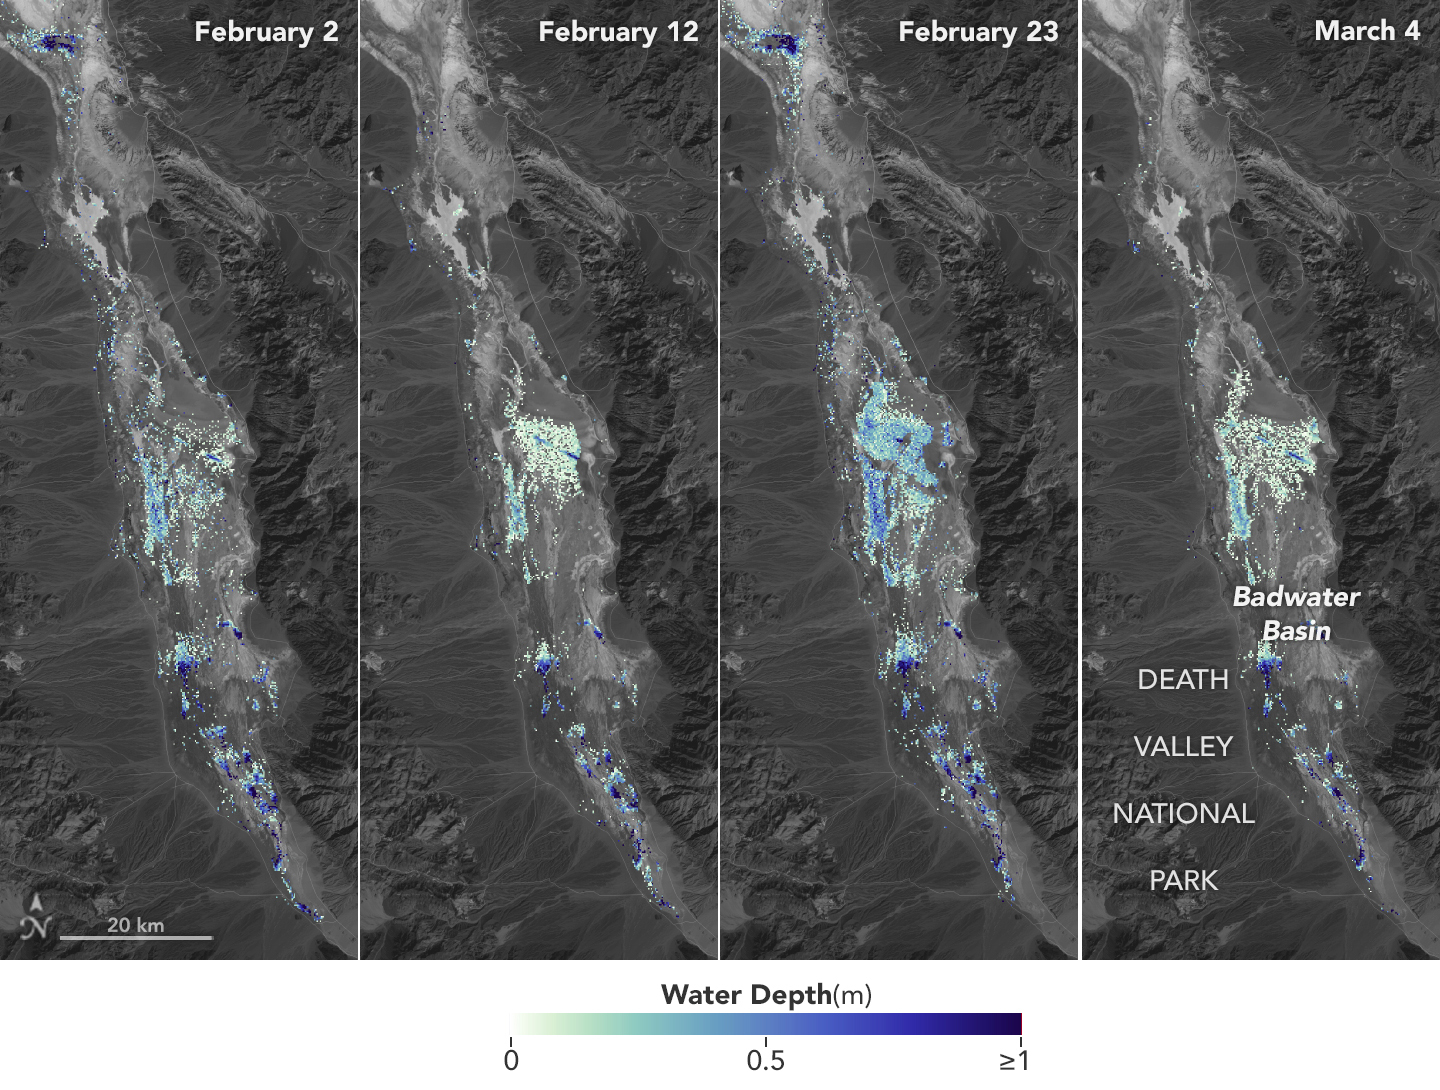 Water depths in Death Valley's temporary lake ranged between about 3 feet (or 1 meter, shown in dark blue) to less than 1.5 feet (0.5 meters, light yellow) from February through early March. By measuring water levels from space, SWOT enabled research to calculate the depth.